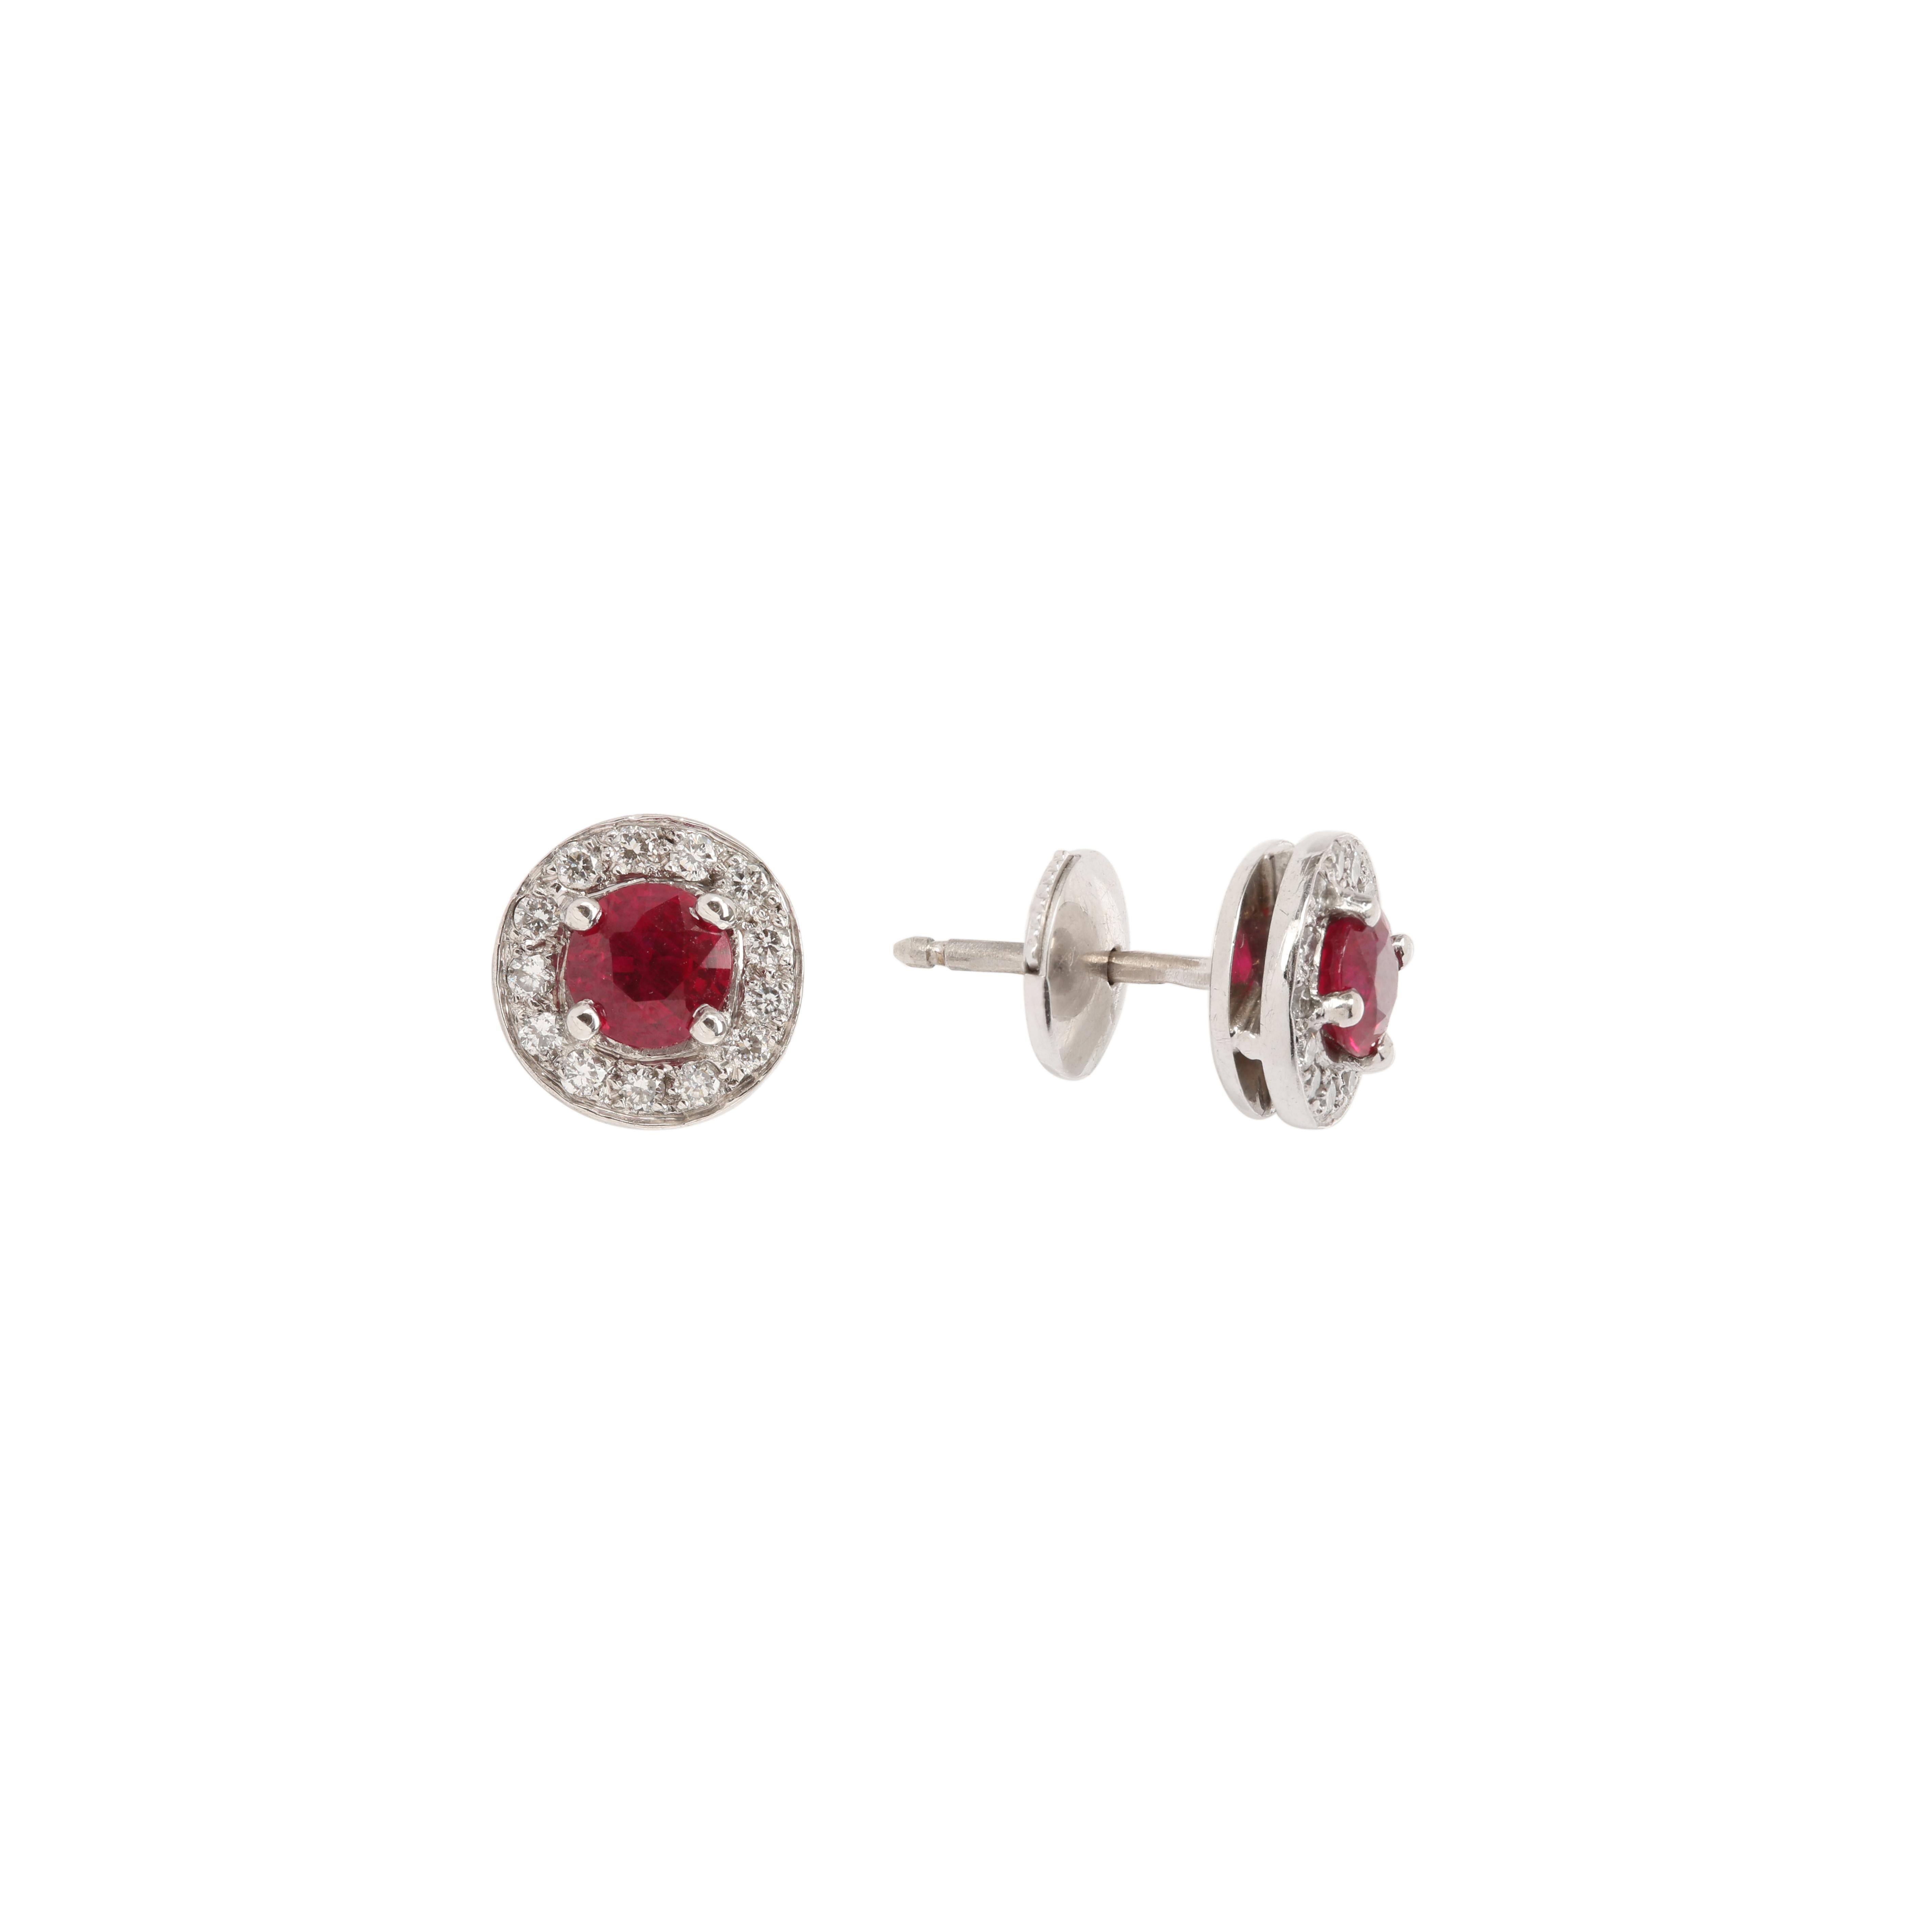 White gold earstuds set with Burmese rubies and diamonds.

Total estimated weight of rubies : 1 carat

Origin: Burma

Total estimated weight of diamonds : 0.25 carats

Dimensions : 9.21 x 9.21 x 4.50 mm(0.362 x 0.362 x 0.177 inch)

Weight of the